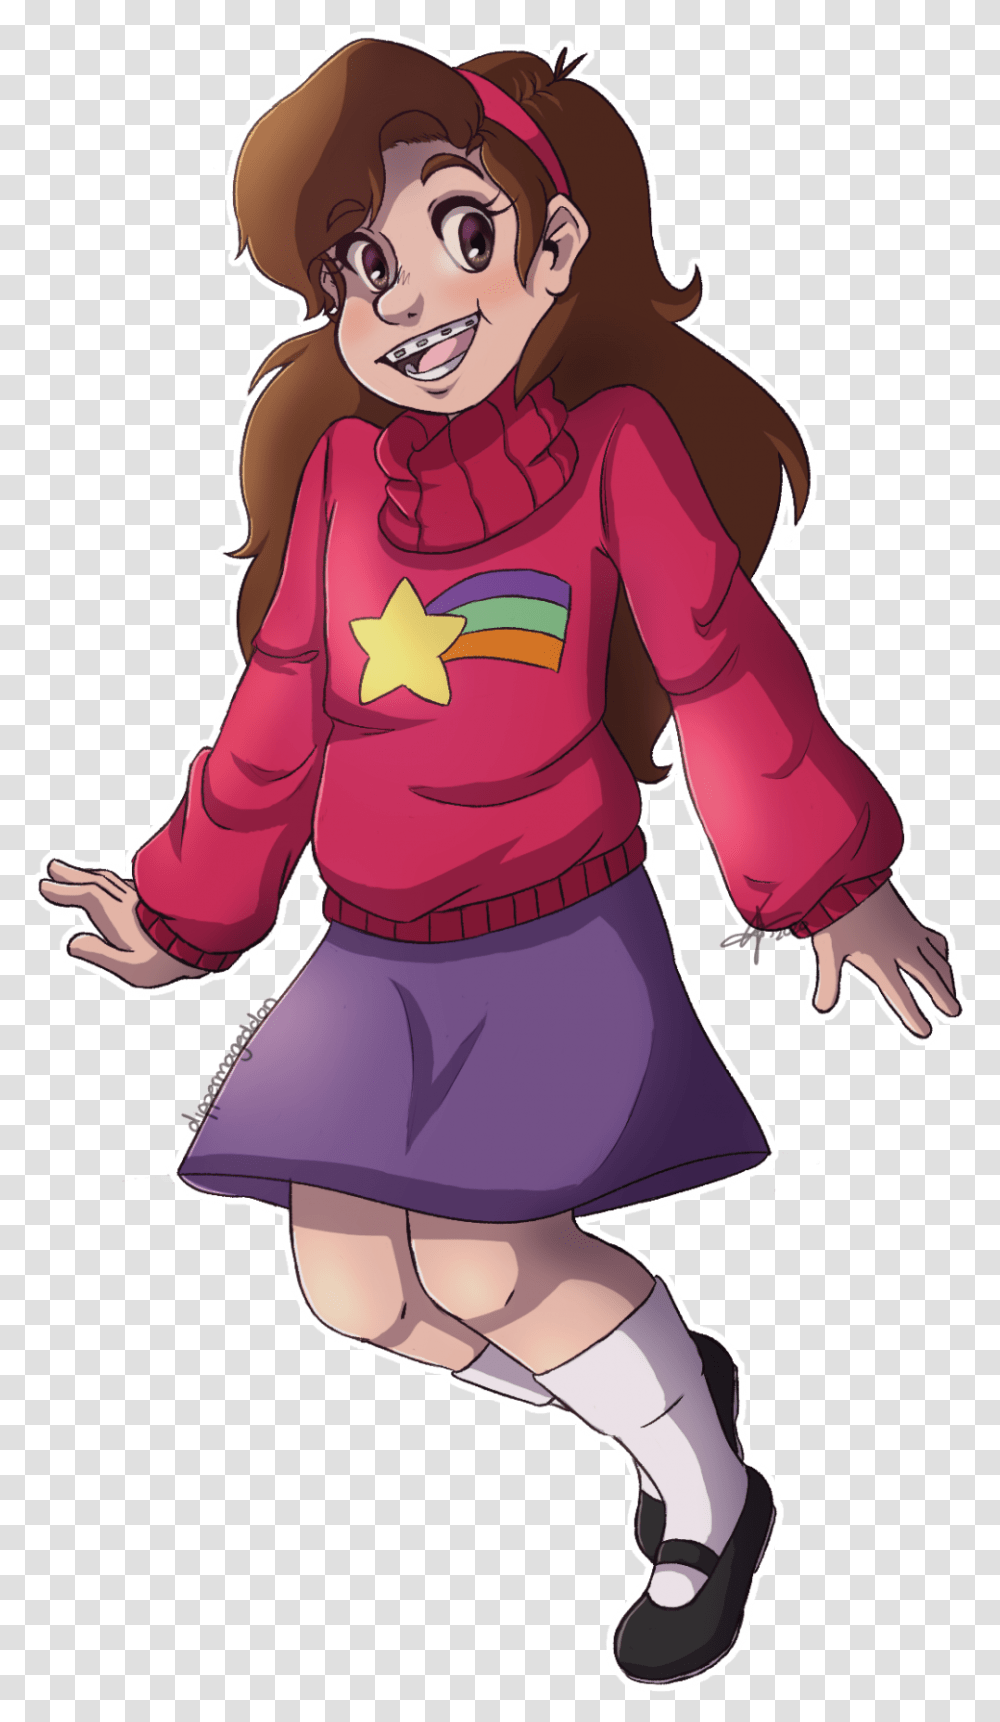 Mabels Design Is Equally As Fun To Draw So Here She Cartoon, Comics, Book, Manga Transparent Png